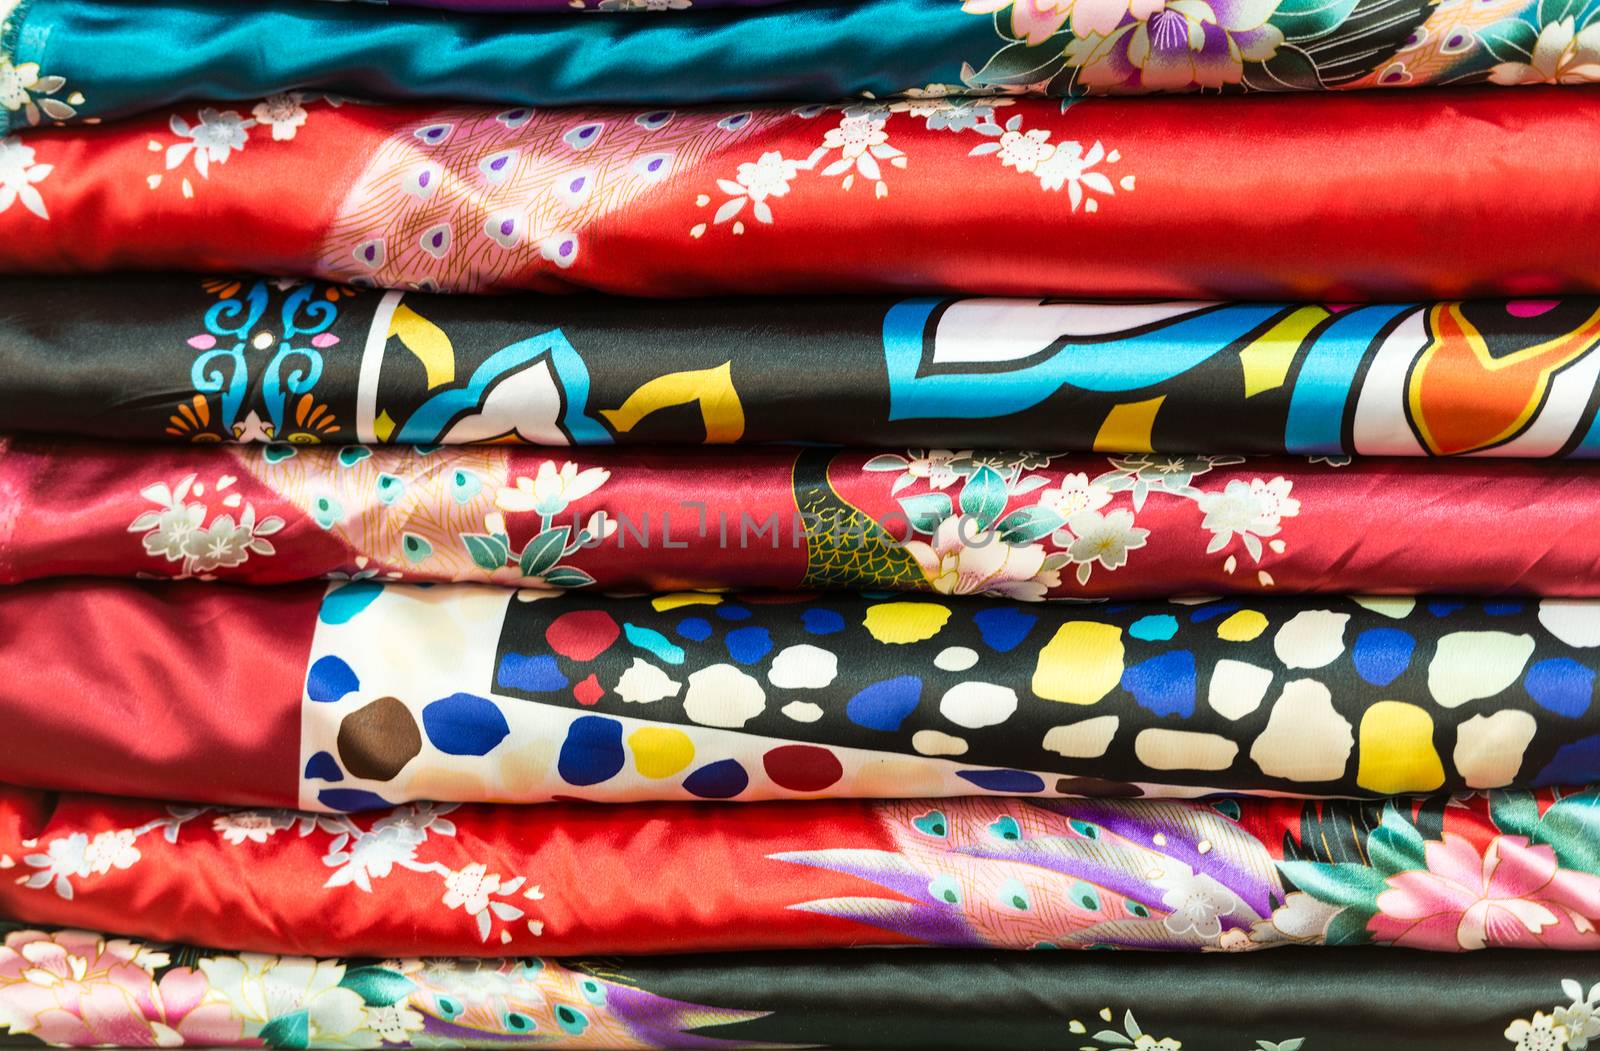 Pile of vibrant folded clothes. Variations of silk dresses with traditional asian design. Beautiful red, black and blue fabrics with abstract ornate pattern. Stack of bright textured materials.